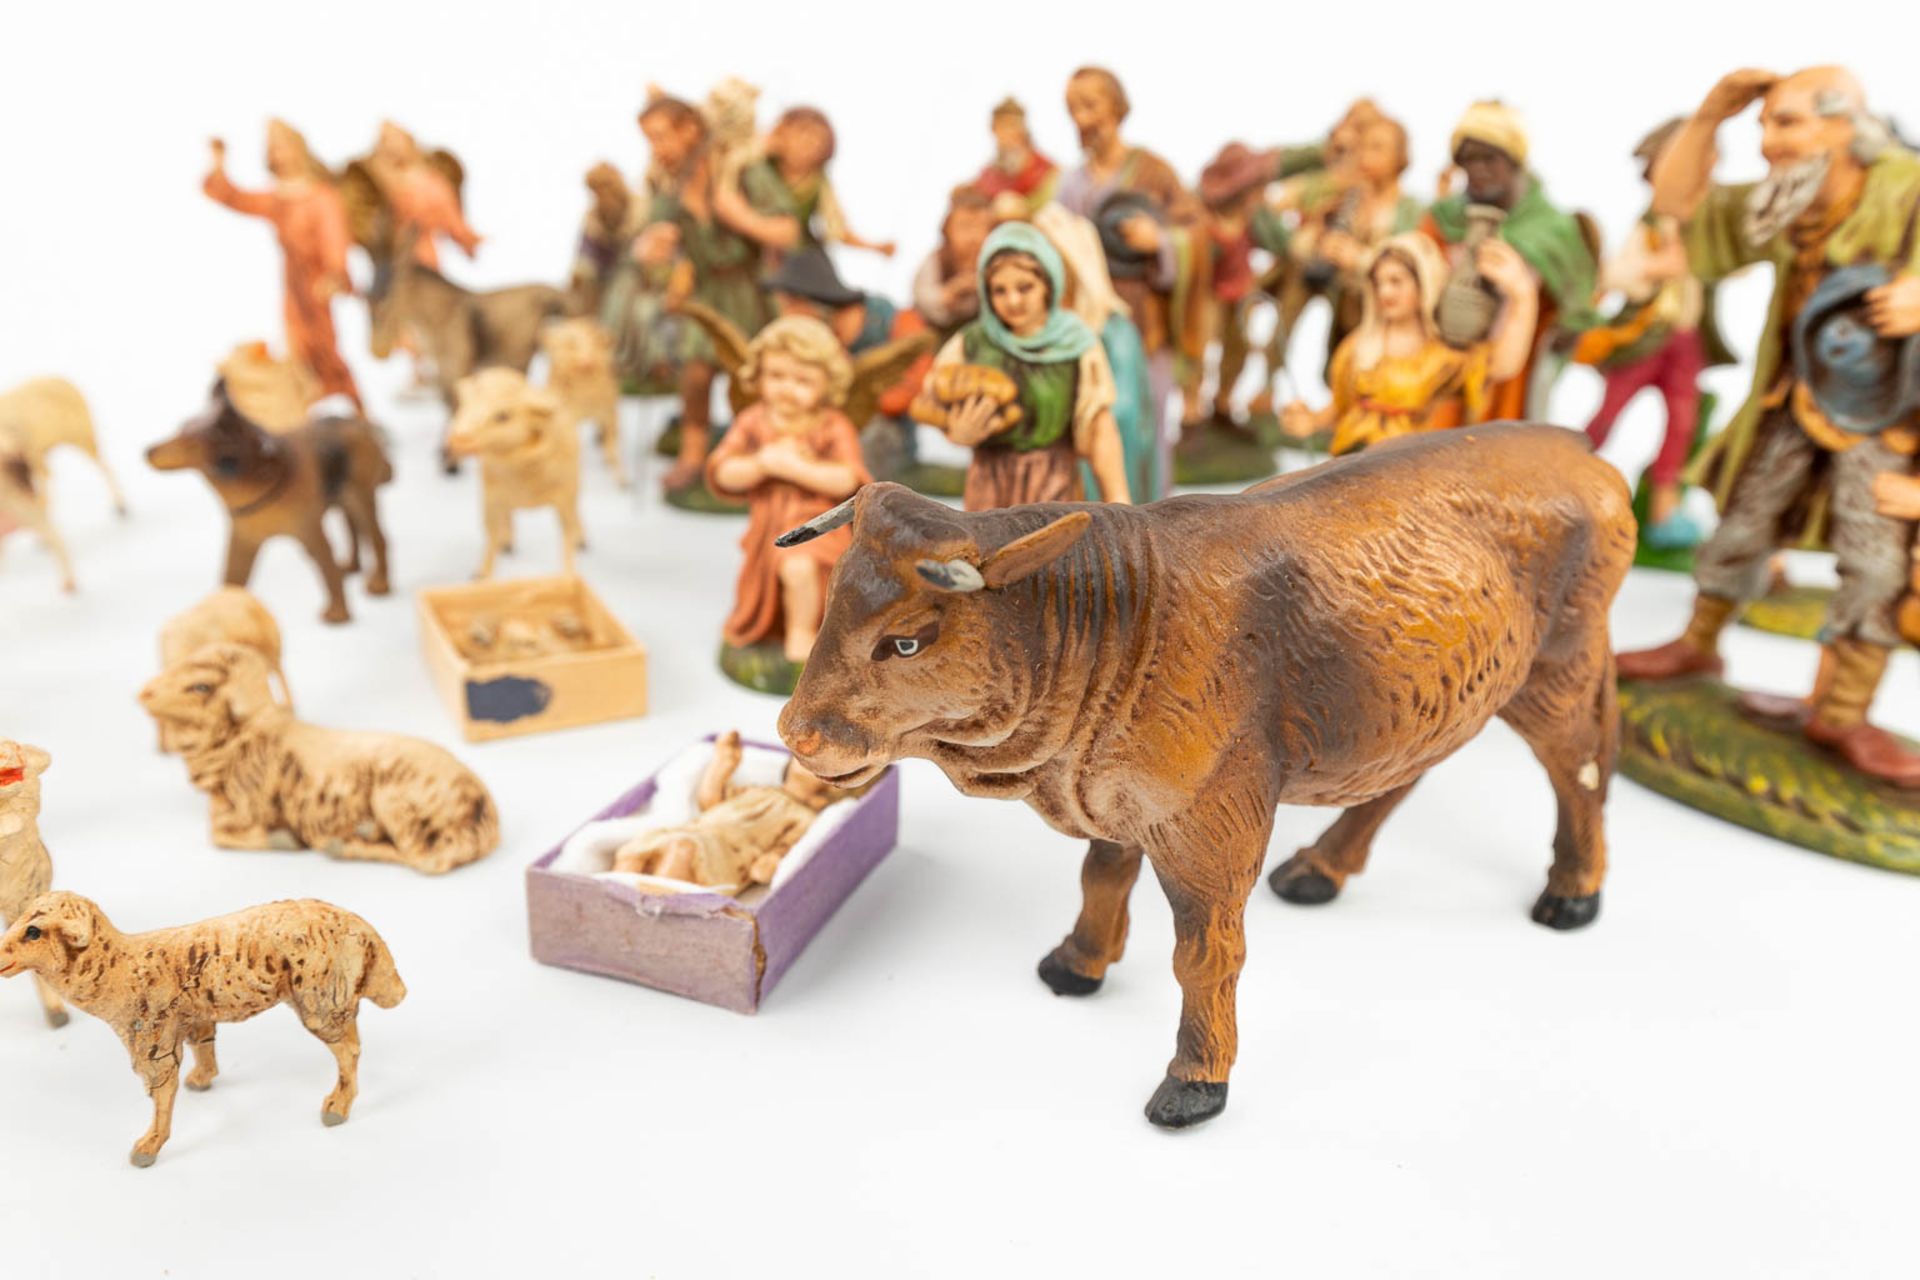 A large and extended Nativity scene with figurines and animals made of papier maché. - Image 12 of 20